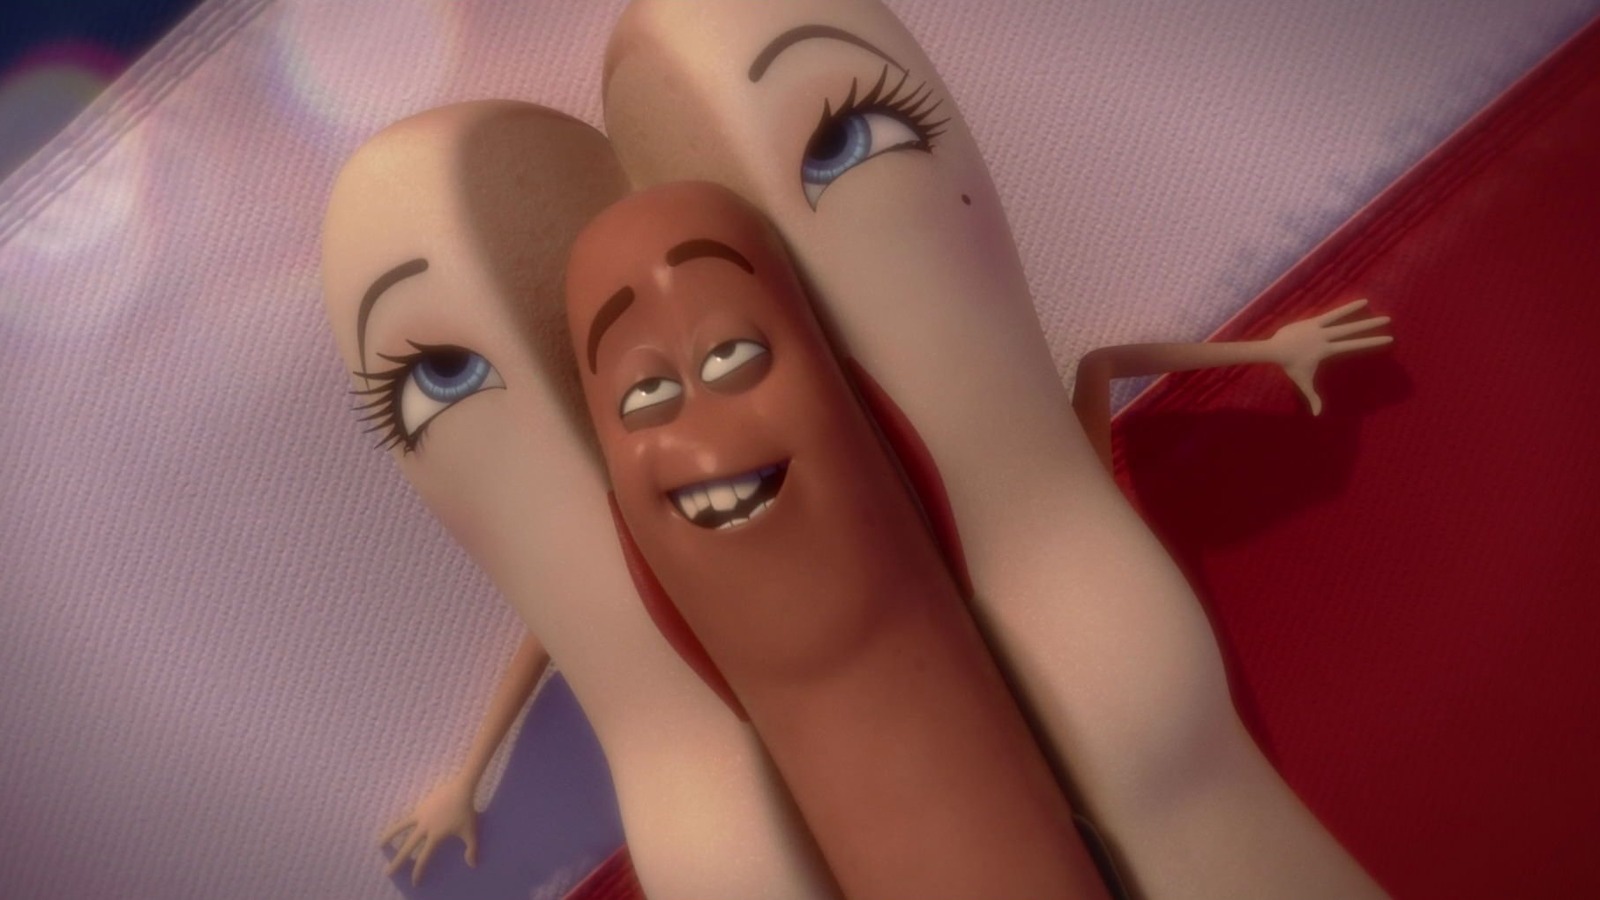 chelsea hodapp recommends sausage party nude pic